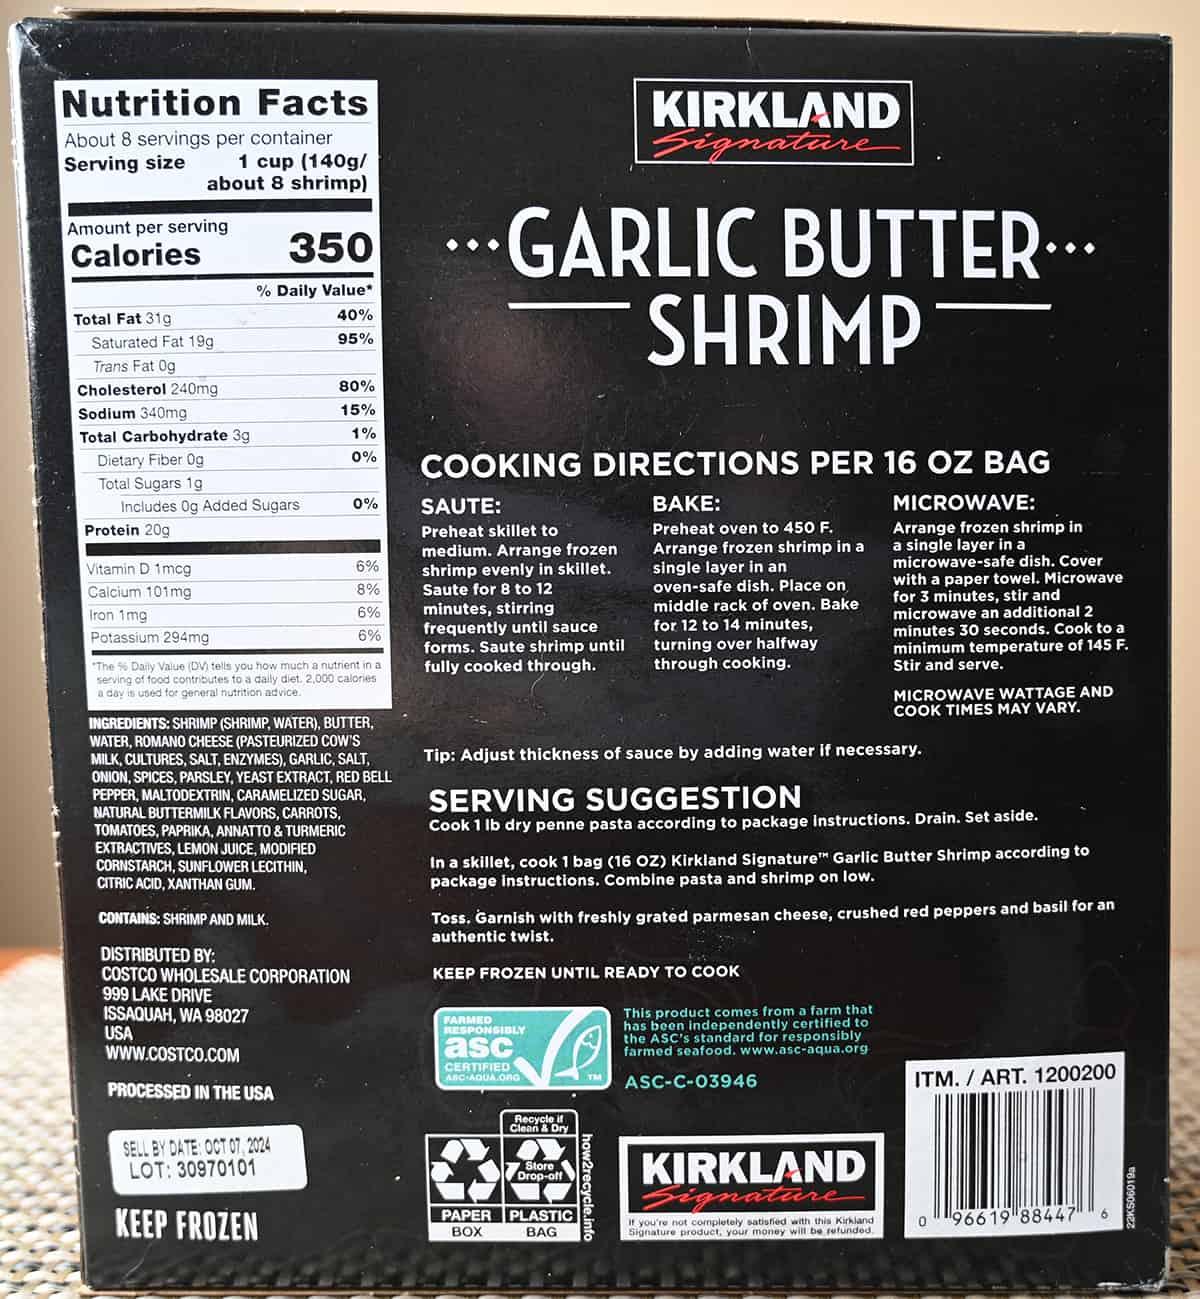 Image of the back of the garlic butter shrimp box showing ingredients, cooking directions and nutrition facts.